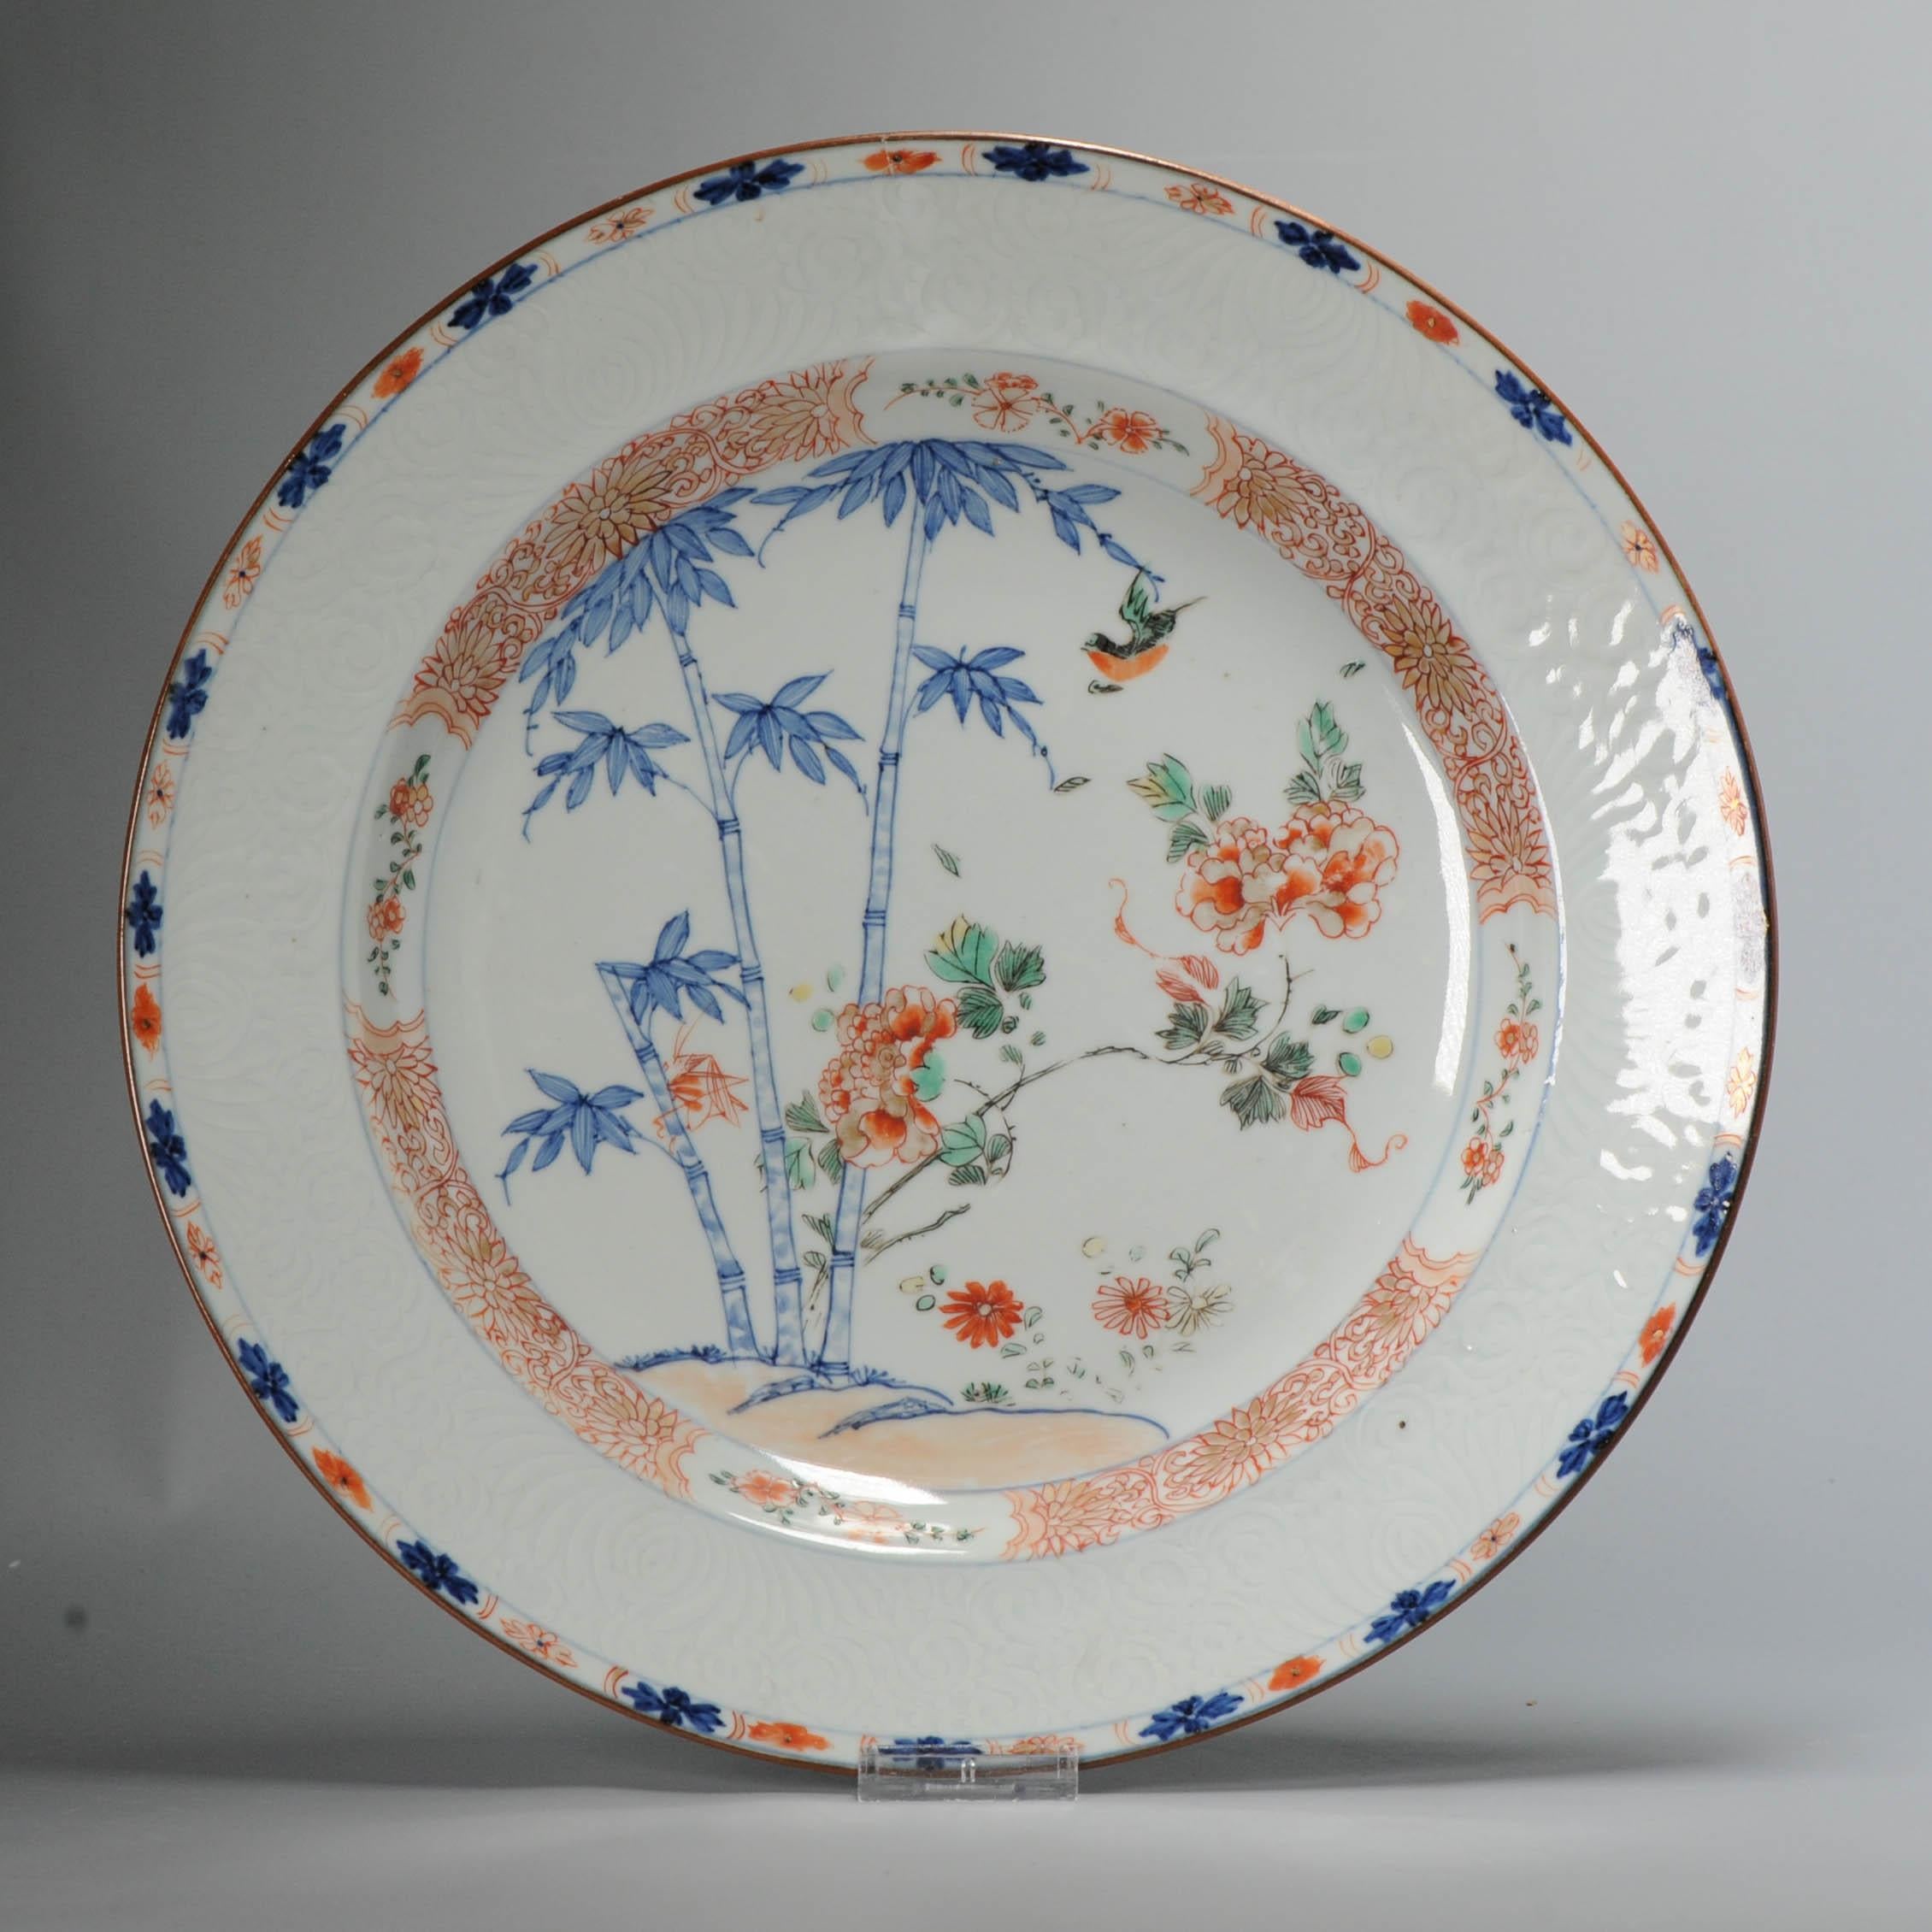 Antique Famille Verte Kangxi Period Chinese Porcelain Large Plate In Good Condition For Sale In Amsterdam, Noord Holland